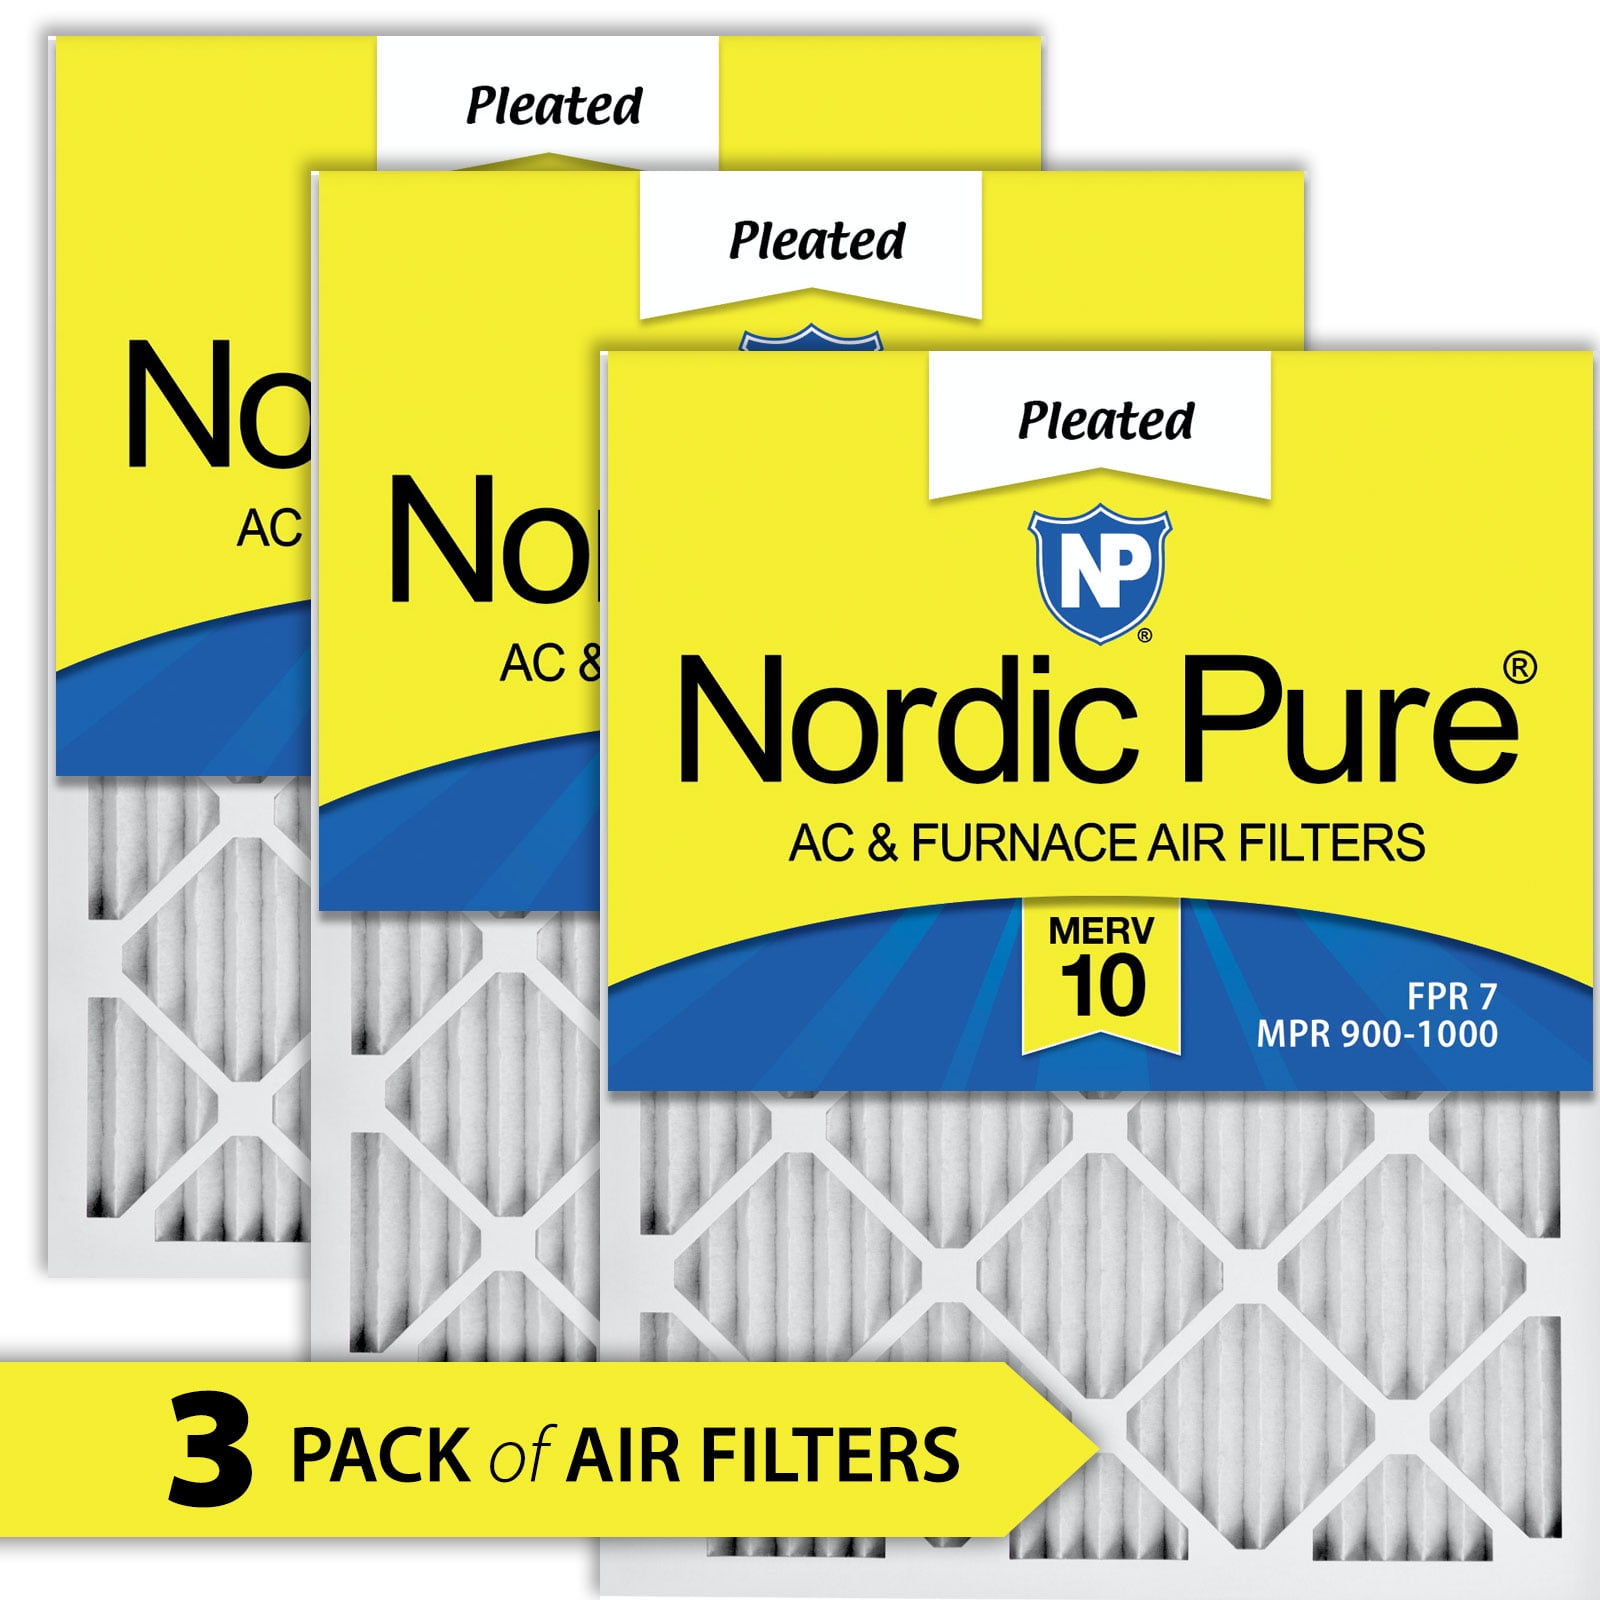 Nordic Pure 24x30x1 MPR 1000 Pleated Micro Allergen Replacement AC Furnace Air Filters 1 Pack 